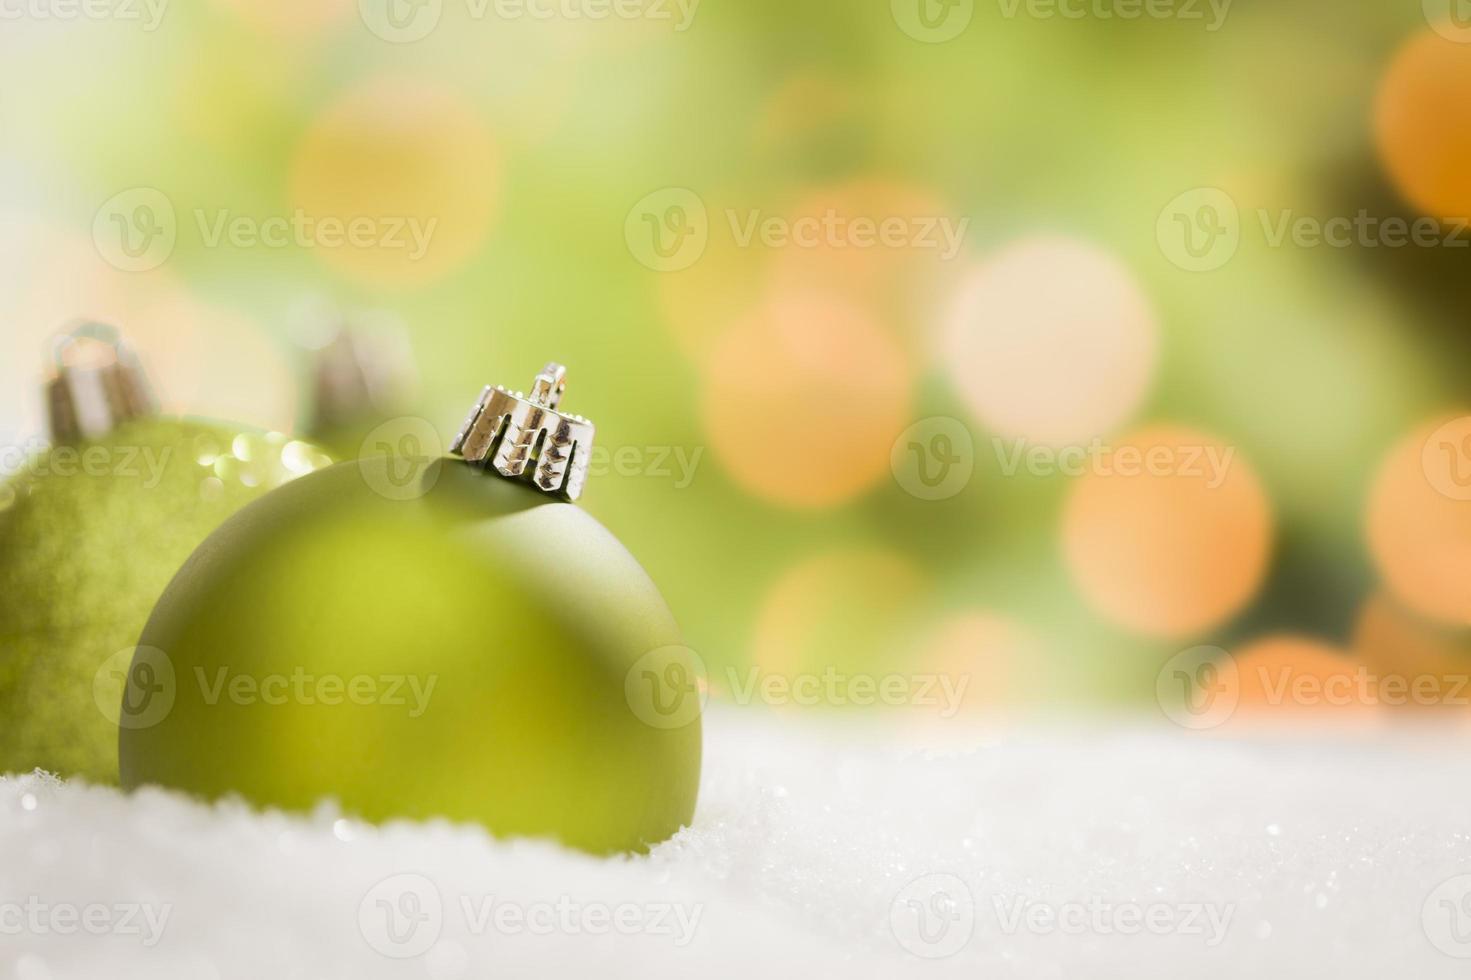 Green Christmas Ornaments on Snow Over an Abstract Background photo